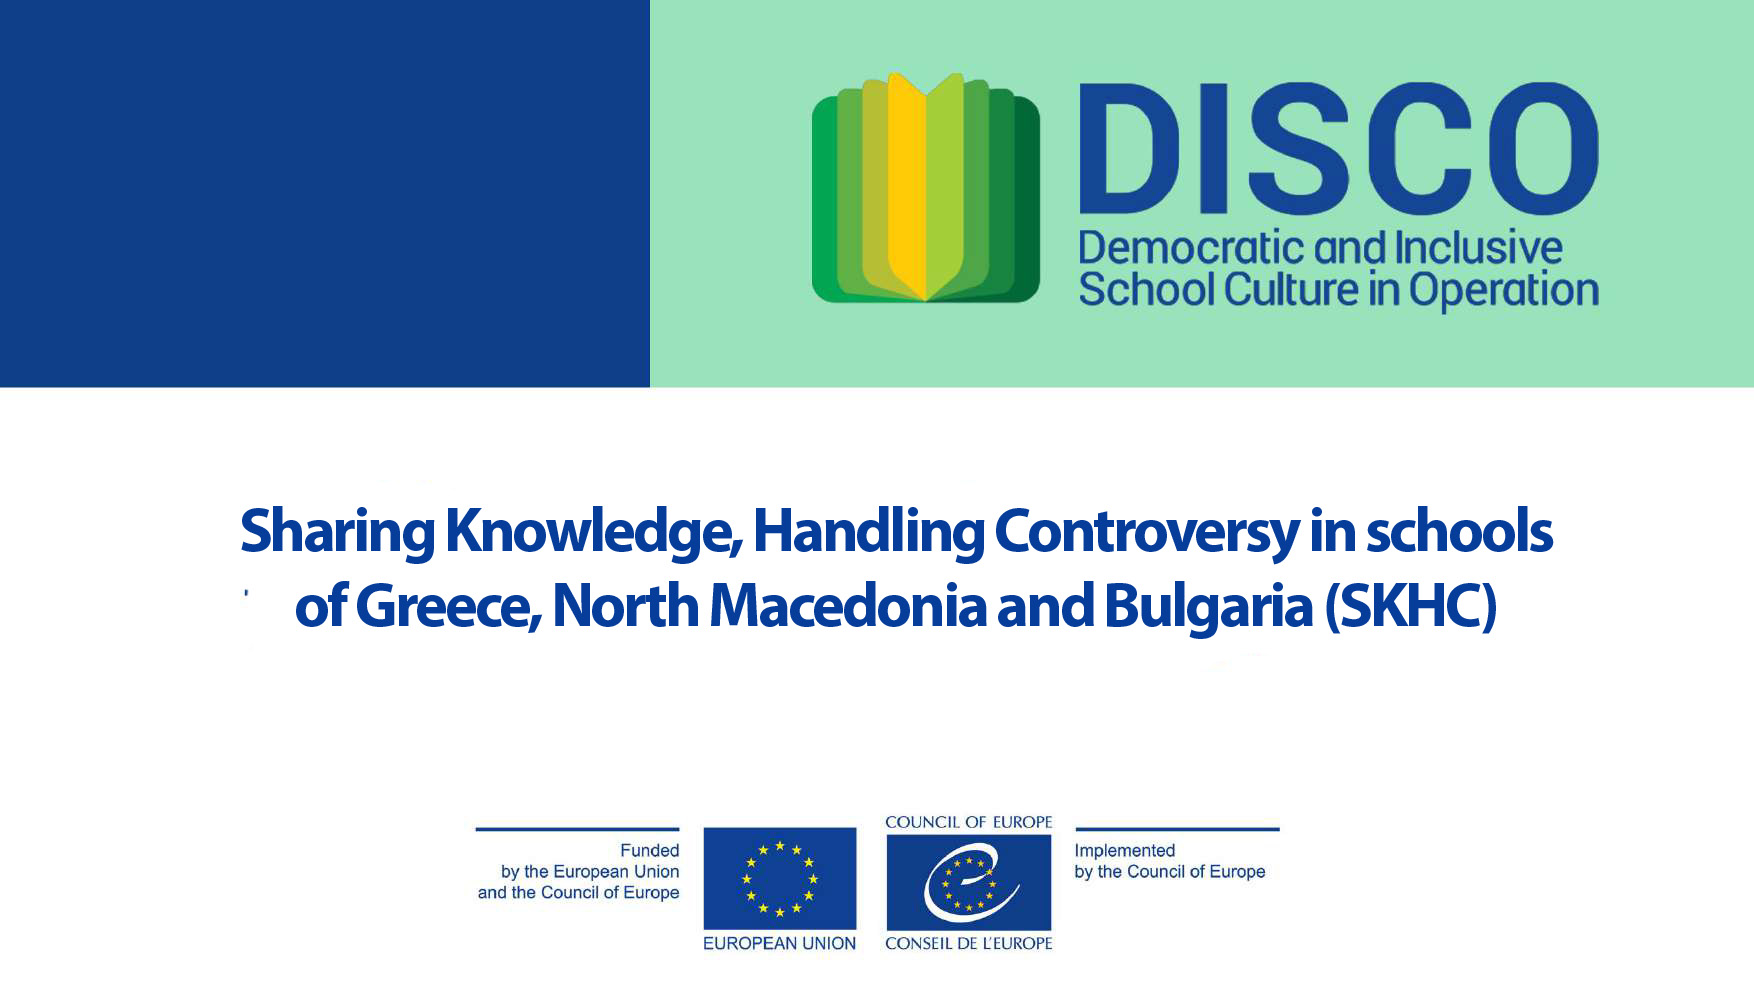 Sharing Knowledge, Handling Controversy in schools of Greece, North Macedonia and Bulgaria